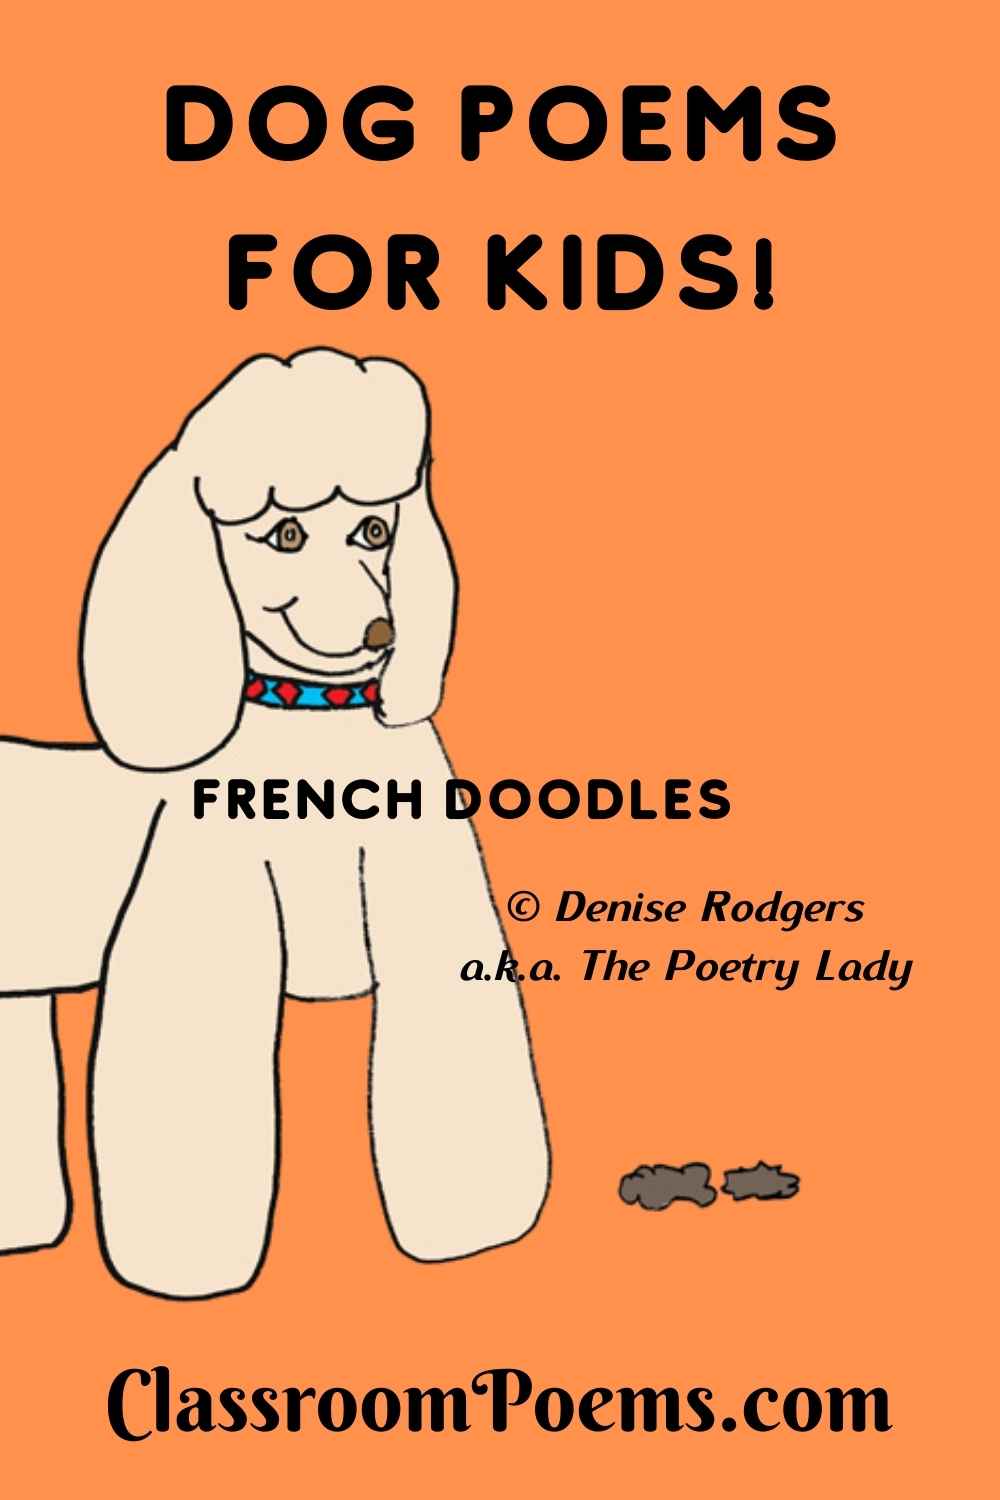 FRENCH DOODLES, a funny dog poem for kids by Poetry Lady Denise Rodgers on ClassroomPoems.com.